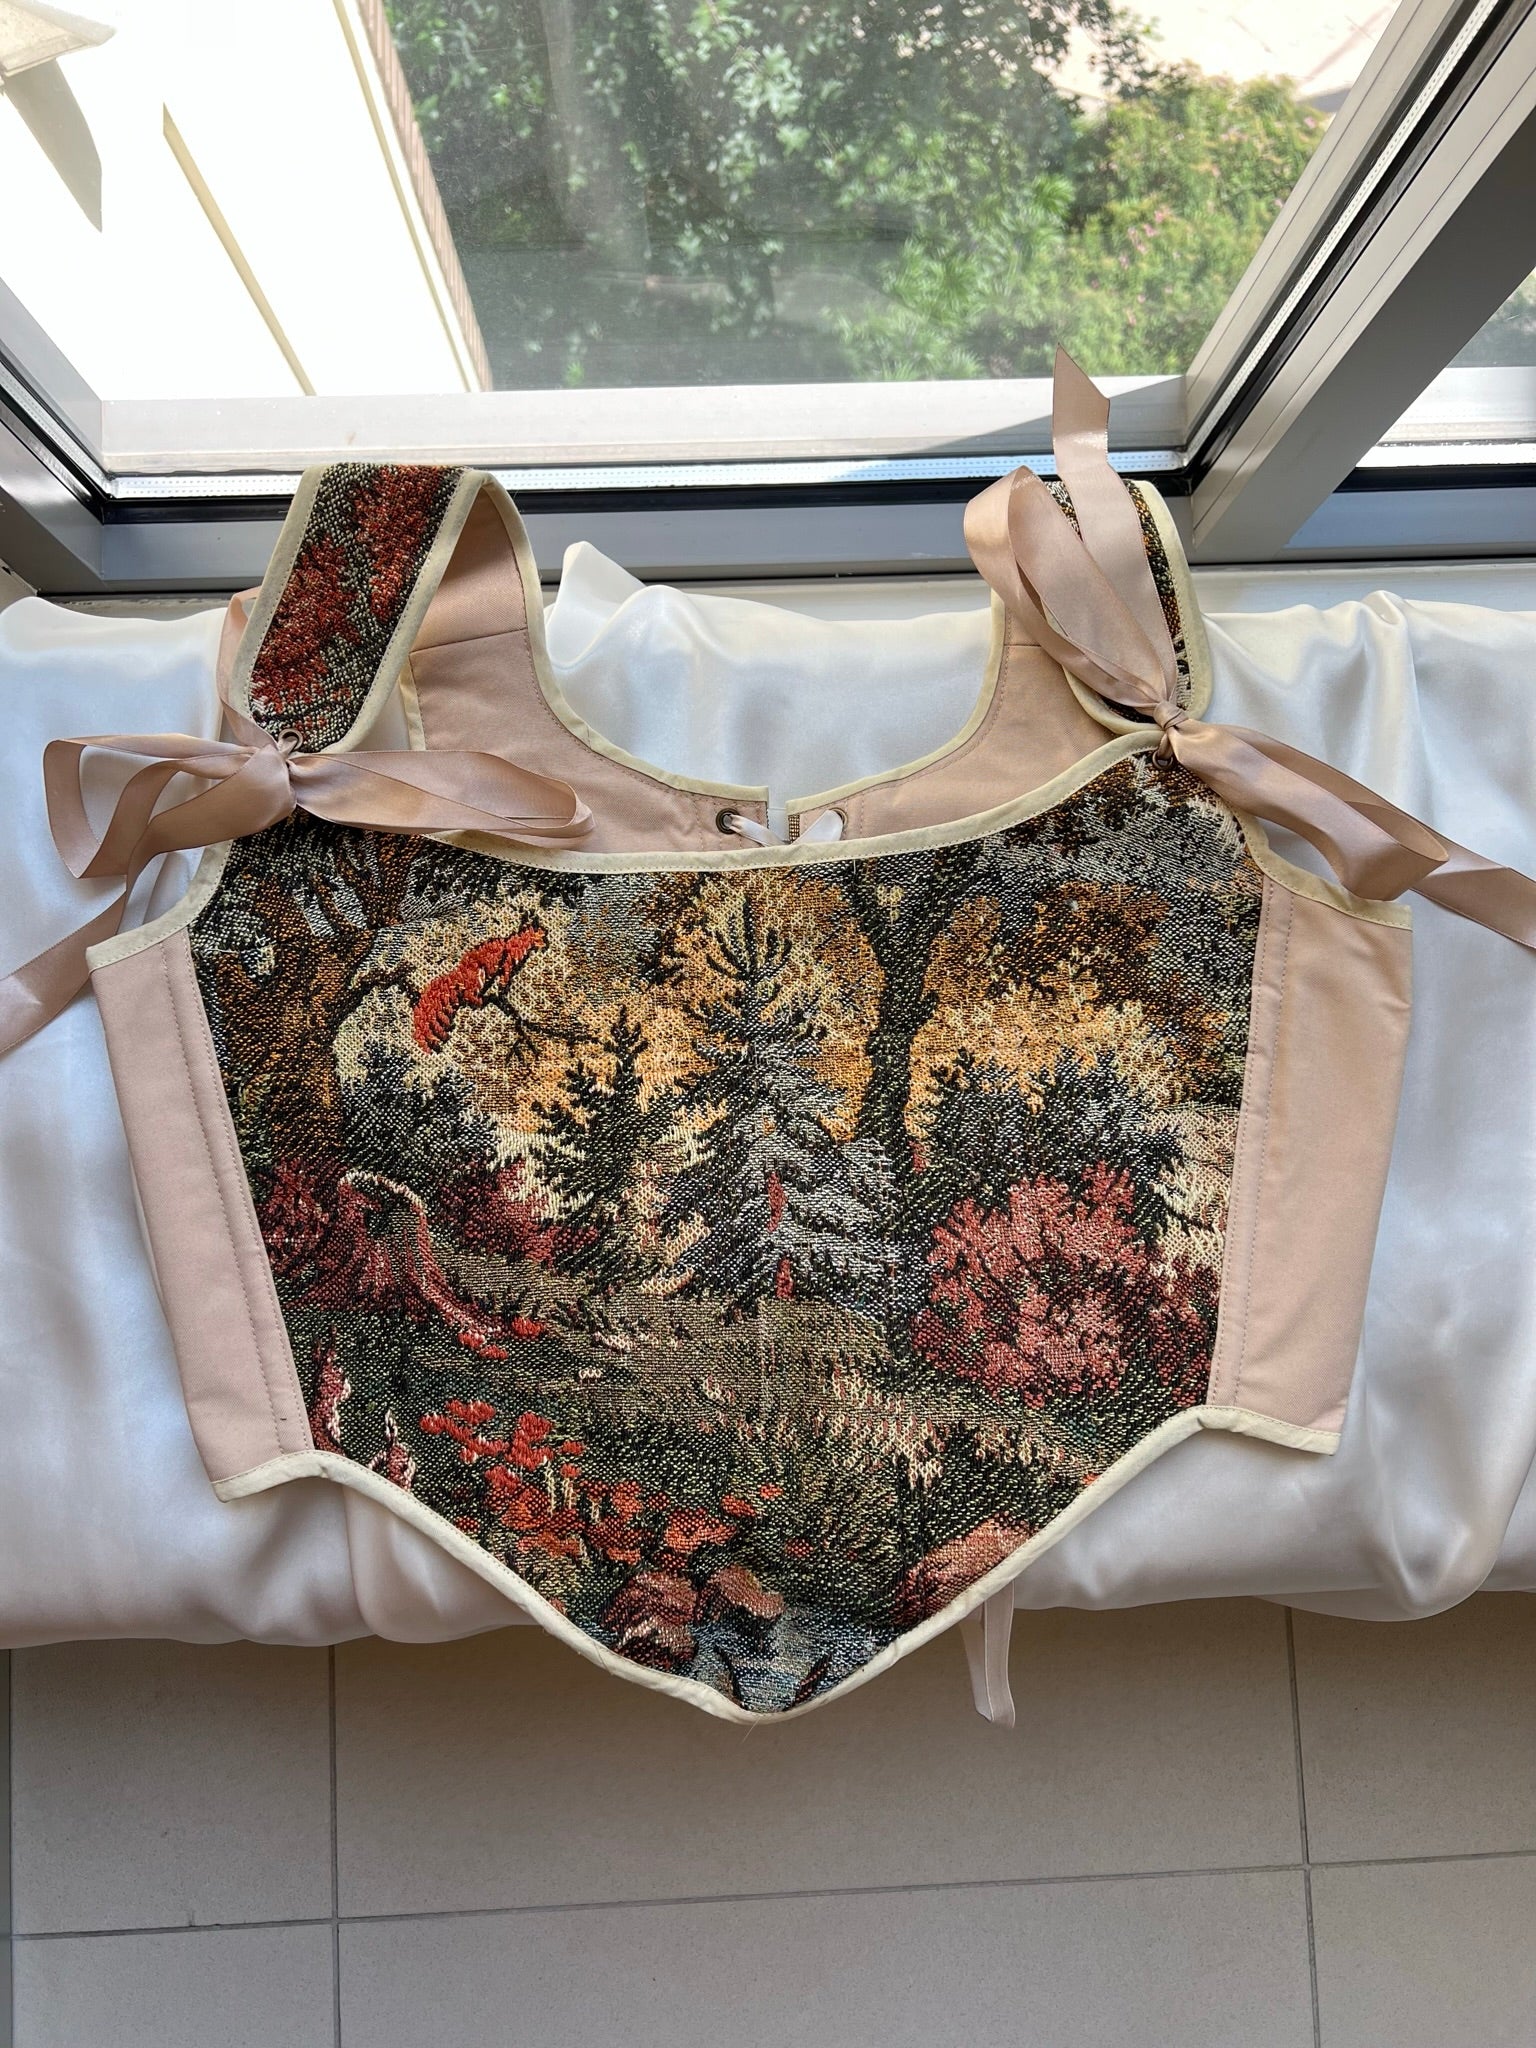 Lace-up Vintage Tapestry Corset Top, "Fox in Meadow” Pattern, Size L (US 10-16)